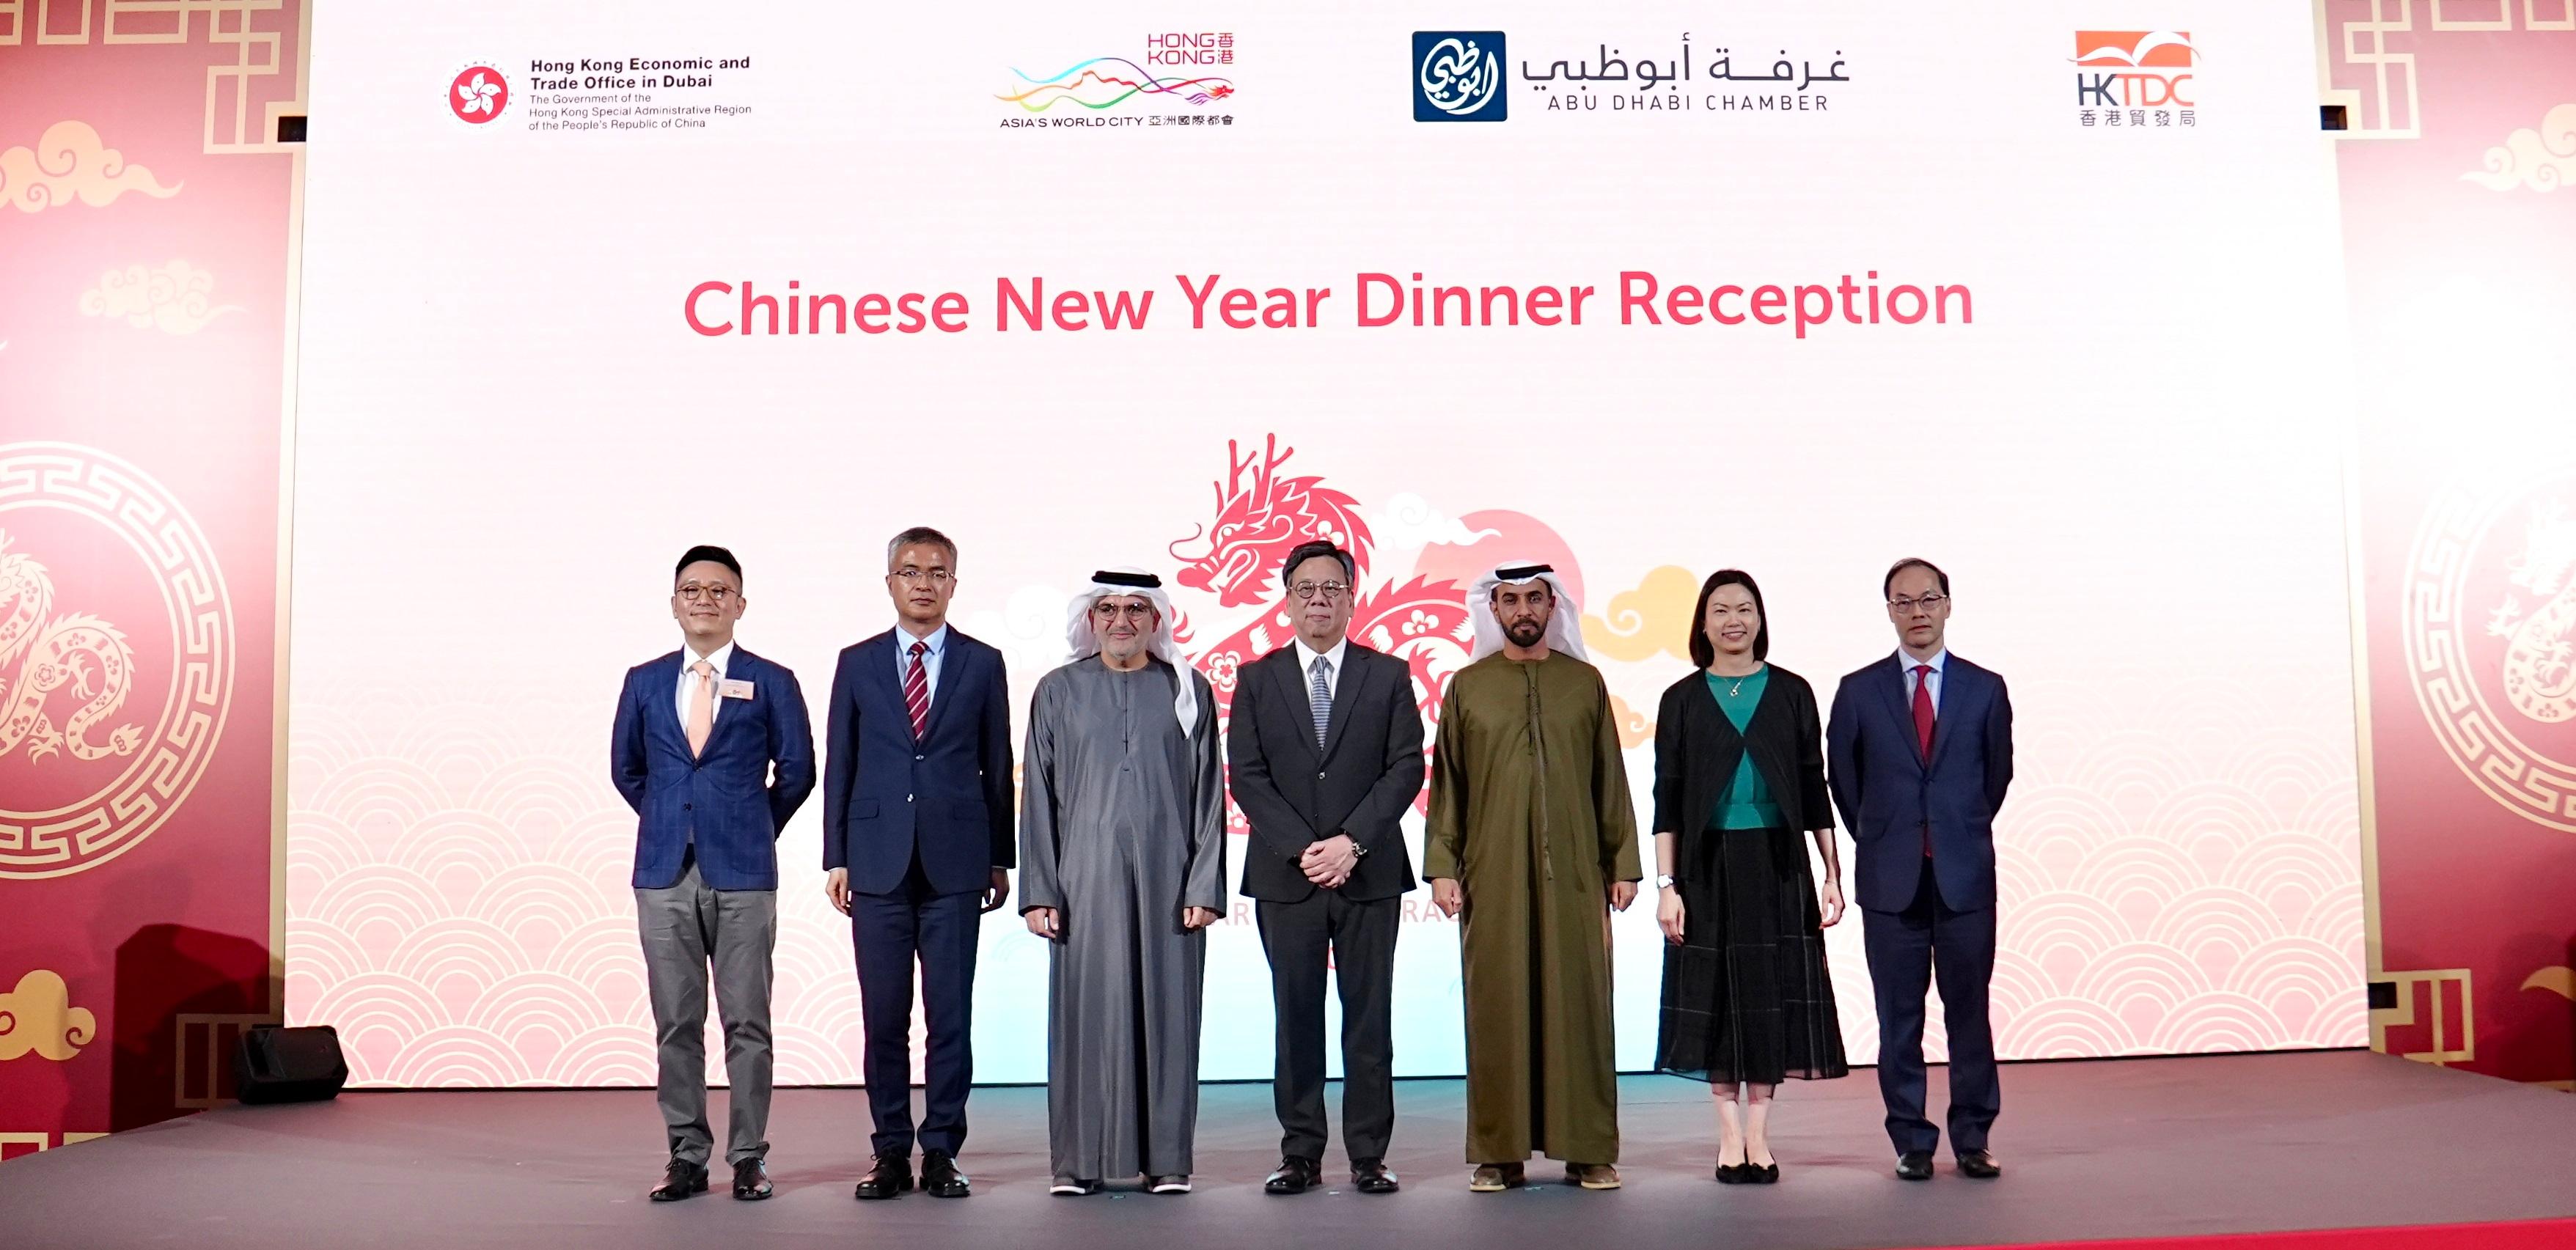 The Hong Kong Economic and Trade Office in Dubai (Dubai ETO), in collaboration with the Hong Kong Trade Development Council (HKTDC) and the Abu Dhabi Chamber of Commerce and Industry, hosted a Chinese New Year dinner reception in Abu Dhabi, the United Arab Emirates (UAE), on February 28 (Abu Dhabi time). Guests attending the event are pictured on the stage. They are (from left) the Director-General of the Dubai ETO, Mr Damian Lee; the Deputy Head of Mission Minister-Counsellor of the Embassy of the People's Republic of China to the UAE, Mr Zhou Biao; the Undersecretary of Abu Dhabi Department of Economic Development, Mr Rashed Al Blooshi; the Secretary for Commerce and Economic Development, Mr Algernon Yau; the First Vice Chairman of the Abu Dhabi Chamber of Commerce and Industry, Dr Ali Saeed bin Harmal Al Dhaheri; the Director-General of Trade and Industry, Ms Maggie Wong; and the Regional Director of Middle East and Africa of the HKTDC, Mr Daniel Lam.